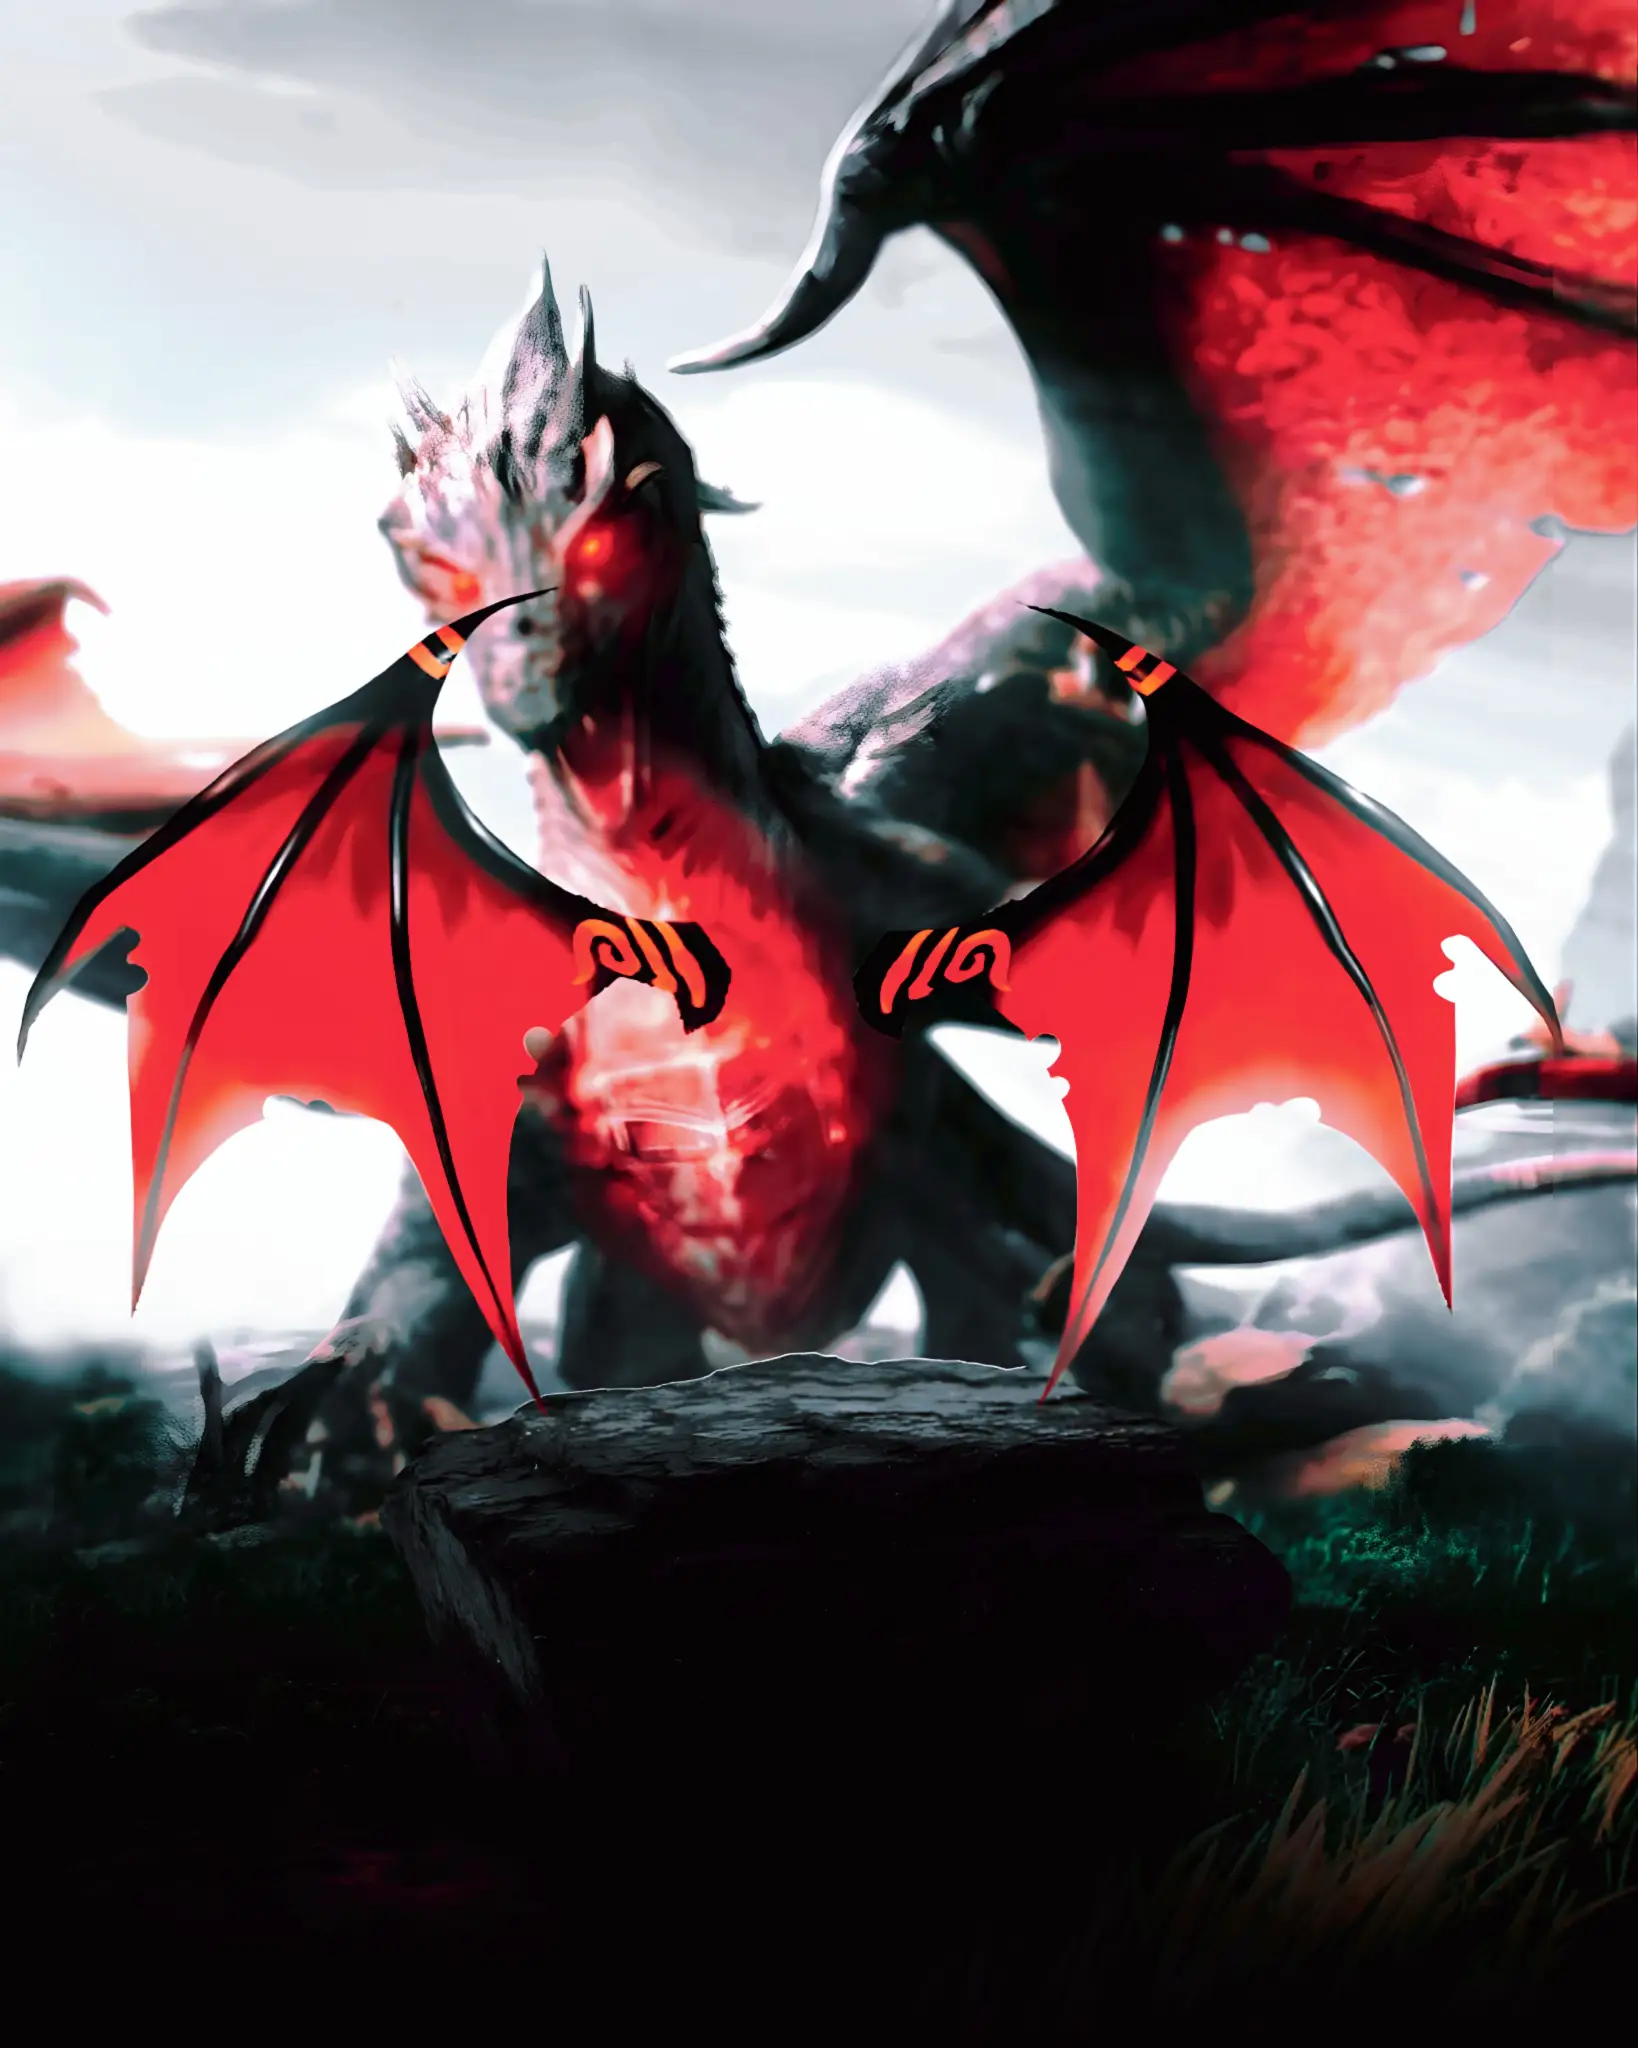 You are currently viewing Picsart dragon background download hd